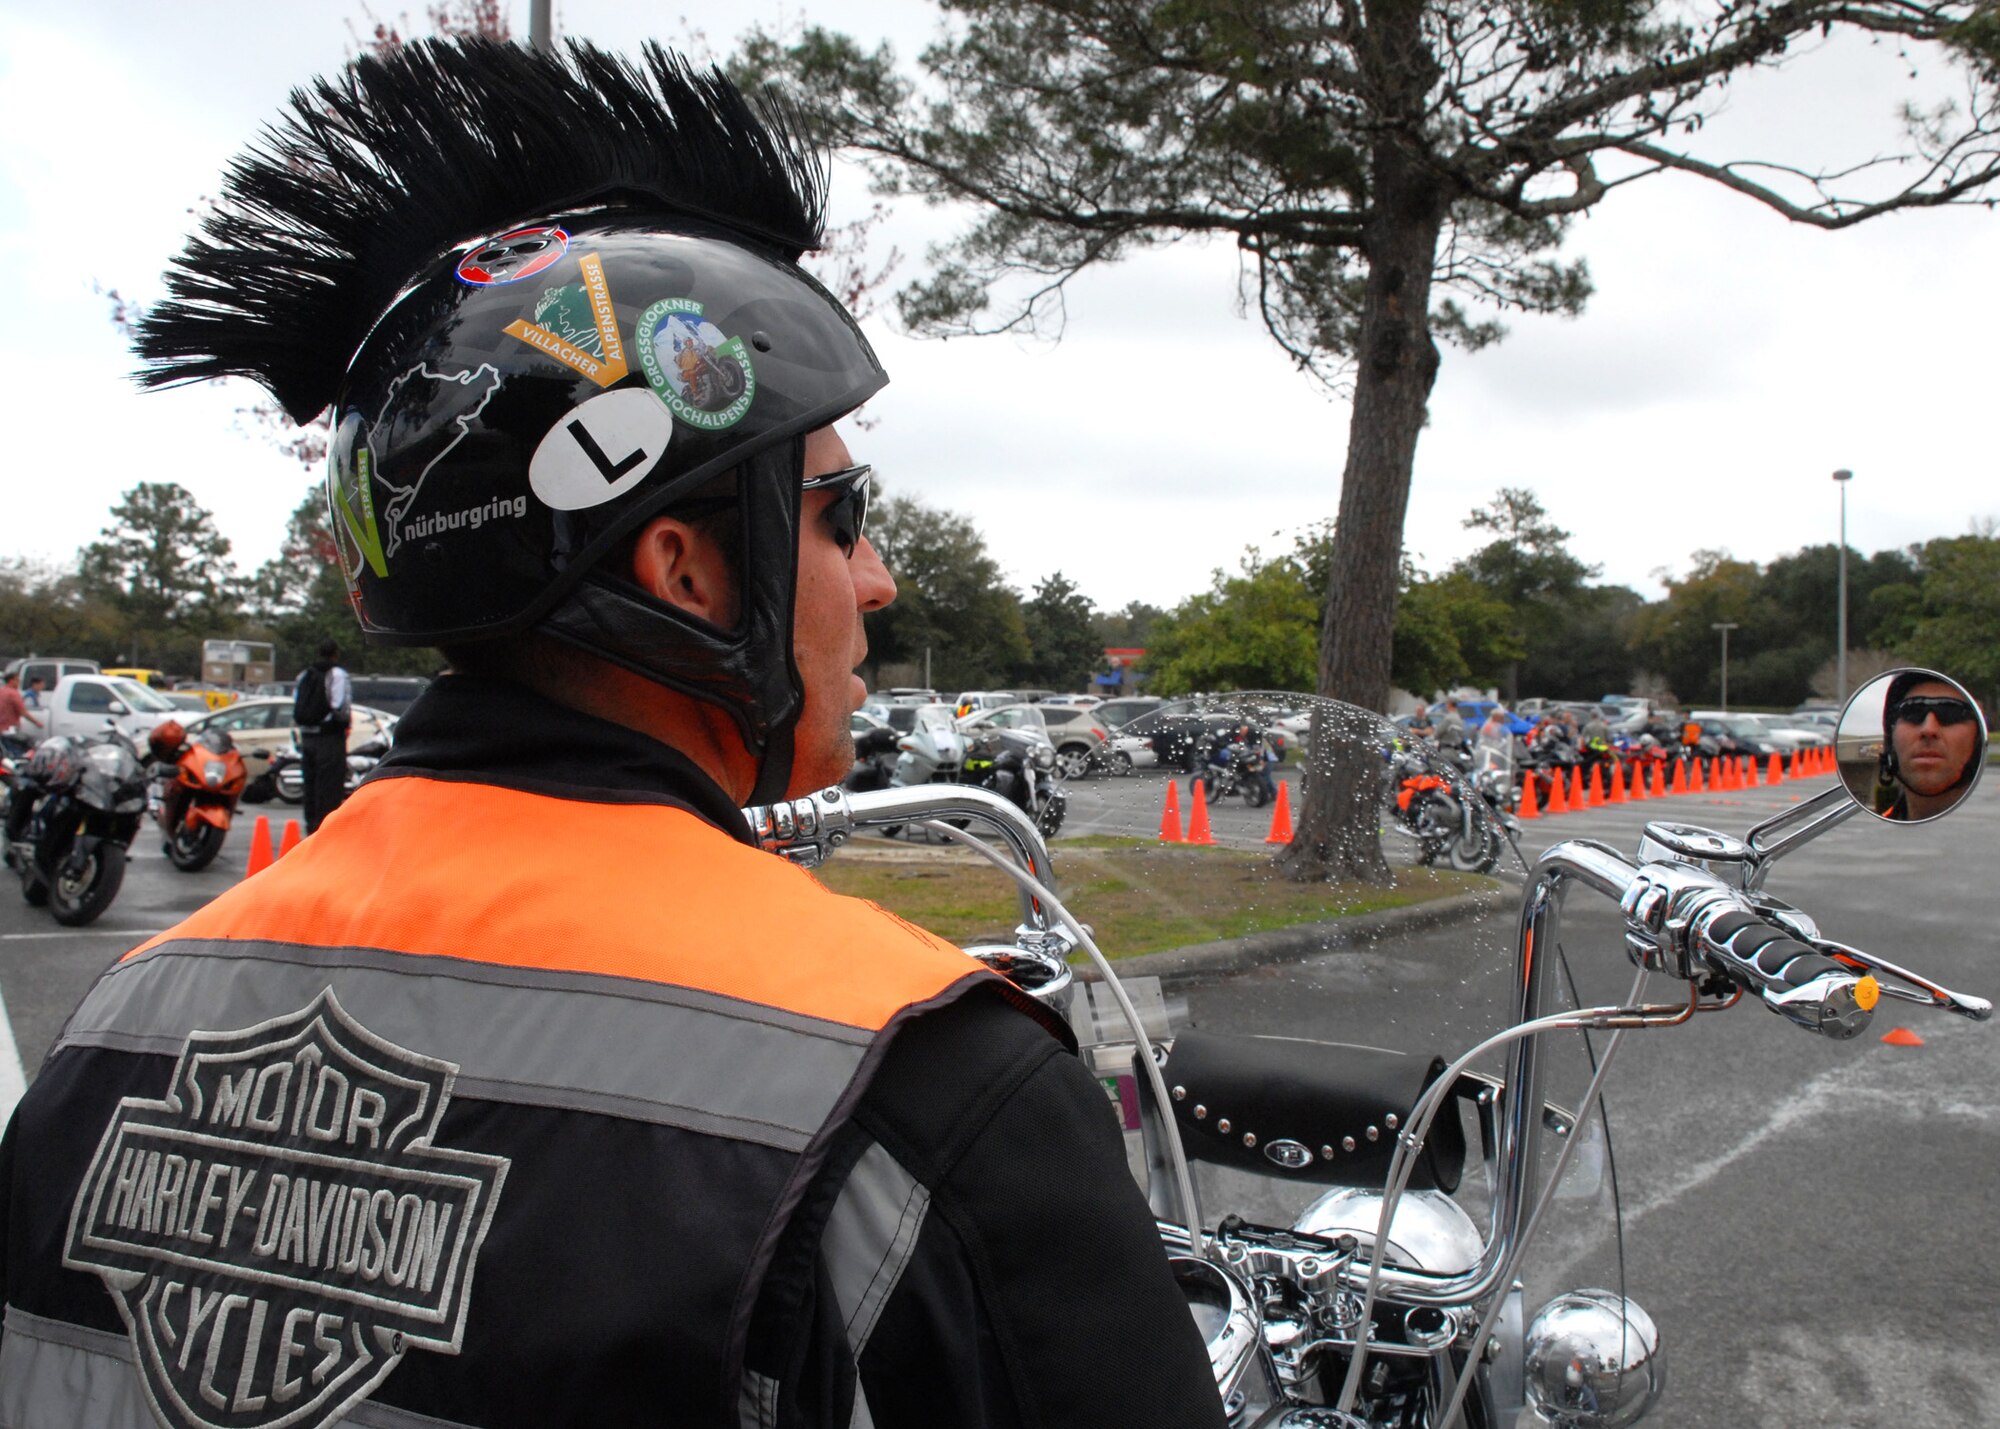 Master Sgt. Ben Ernst, 33rd Fighter Wing, waits for his turn on the riding competition March 12 at Team Eglin's third annual Motorcycle Safety Day.  Despite threatening skies, the event brought out approximately 220 riders to participate in safety discussions, riding skills competition and group ride.  The safety day came at a critical time for Eglin with spring break approaching and a recent active-duty death involving a motorcycle. (U.S. Air Force photo/Samuel King Jr.)